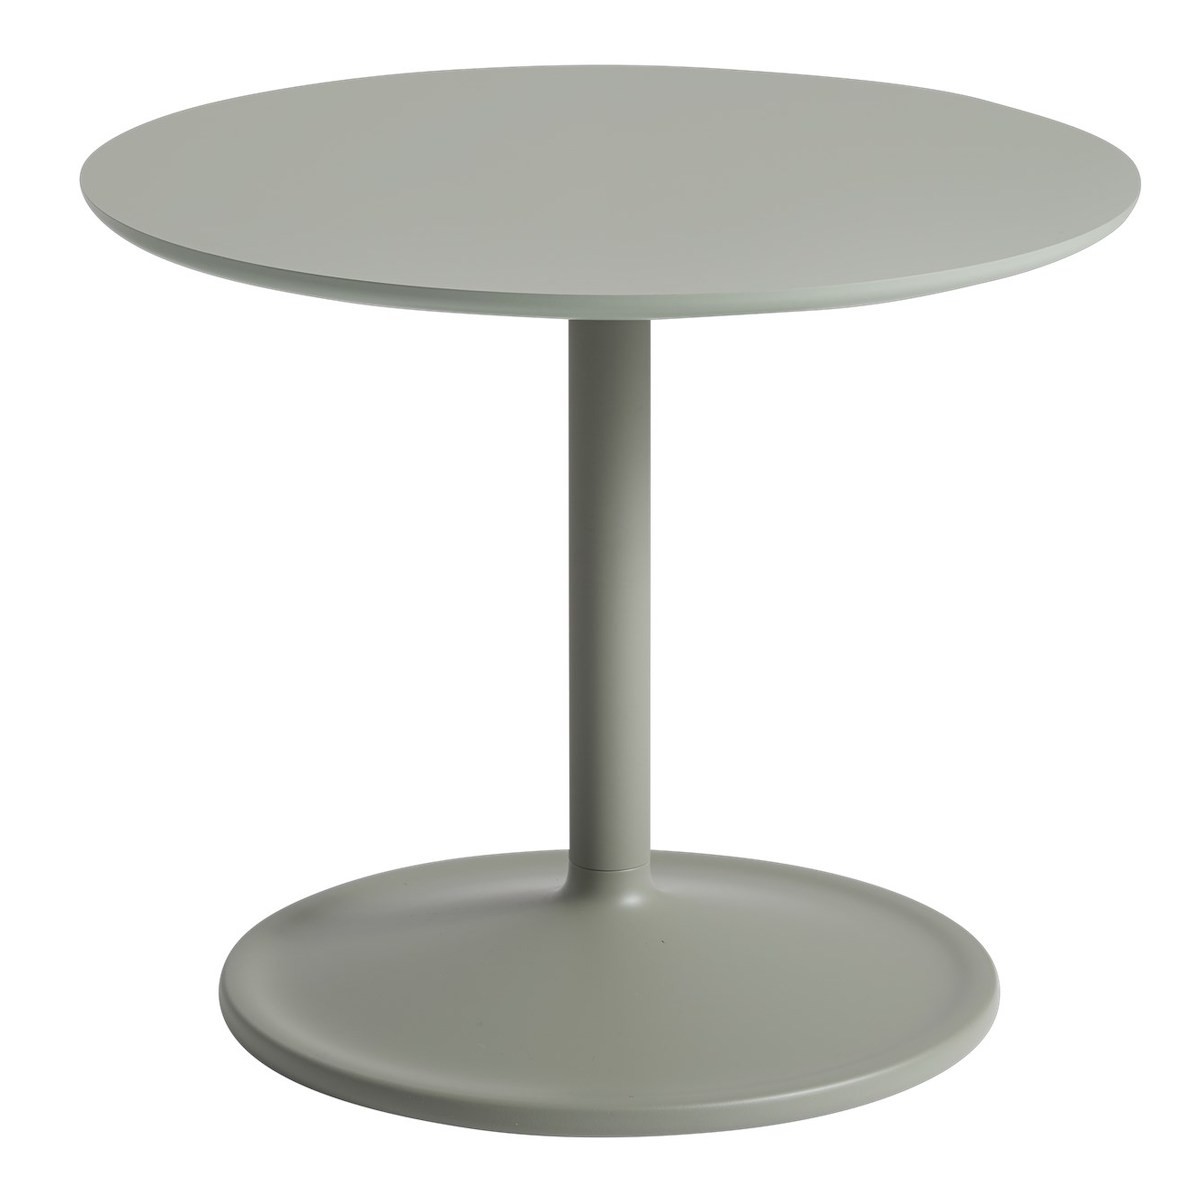 Dusty green - Ø48cm, H40cm - table d'appoint Soft